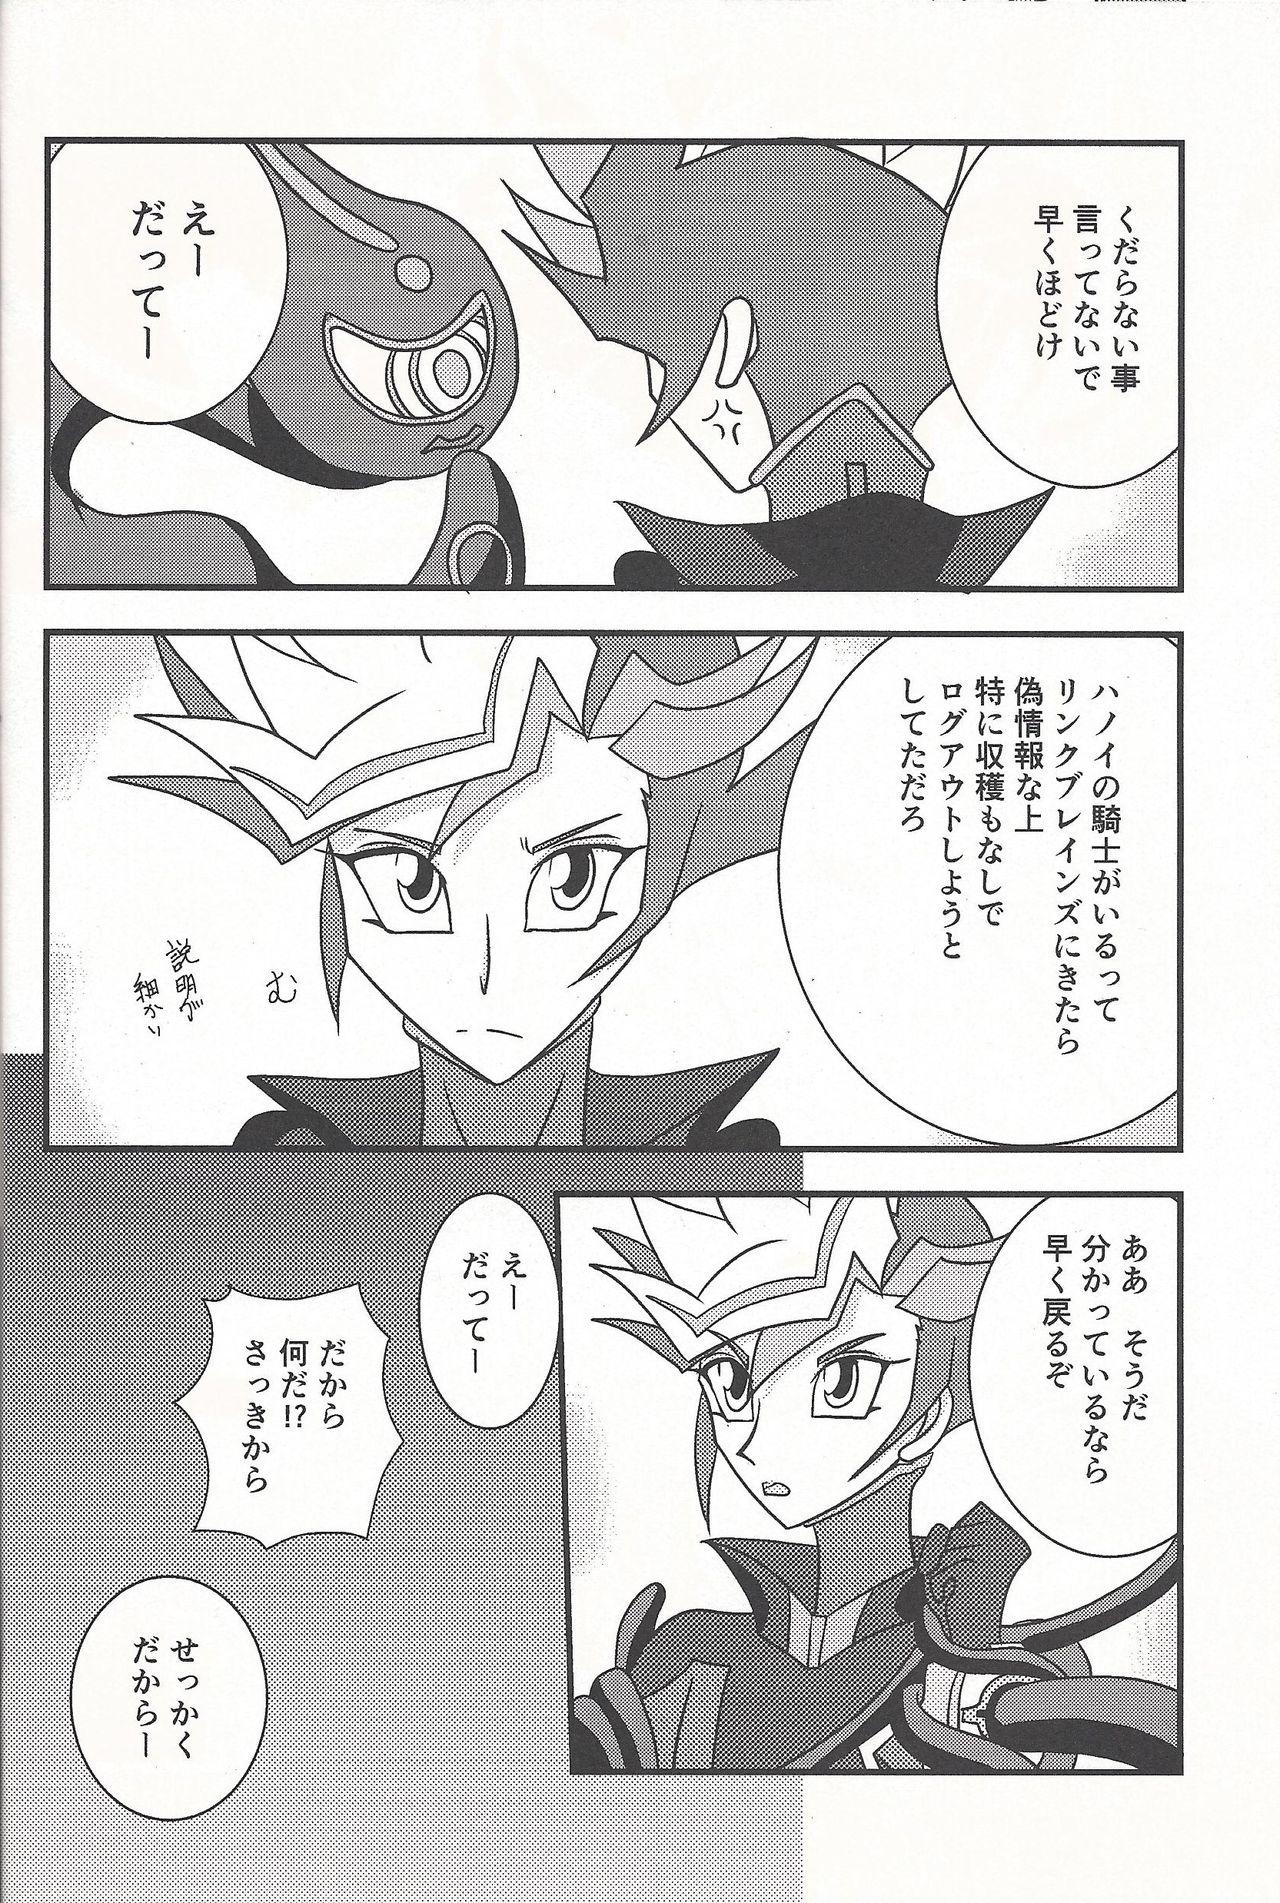 Adorable Mirrors gate - Yu gi oh vrains Machine - Page 5